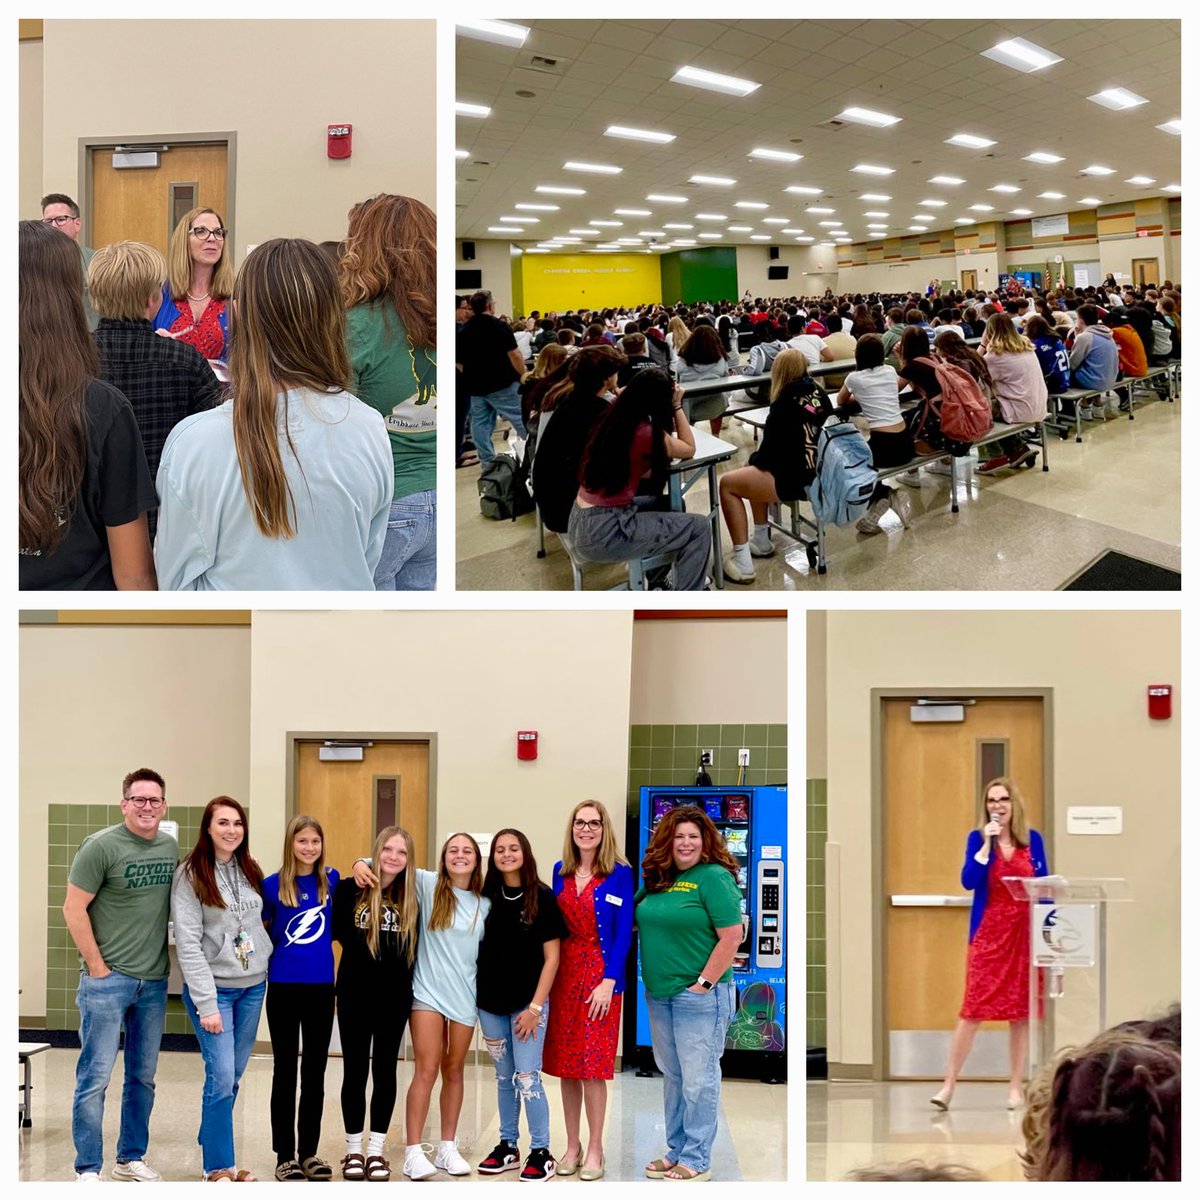 Thank you @CypressMiddle for the warm welcome today! It was terrific to talk with over 400 7th-graders about civic engagement, advocacy, and civility. I may have thrown in a little math, too. 😉 Our future is in good hands with these young people. @pascoschools #Civics